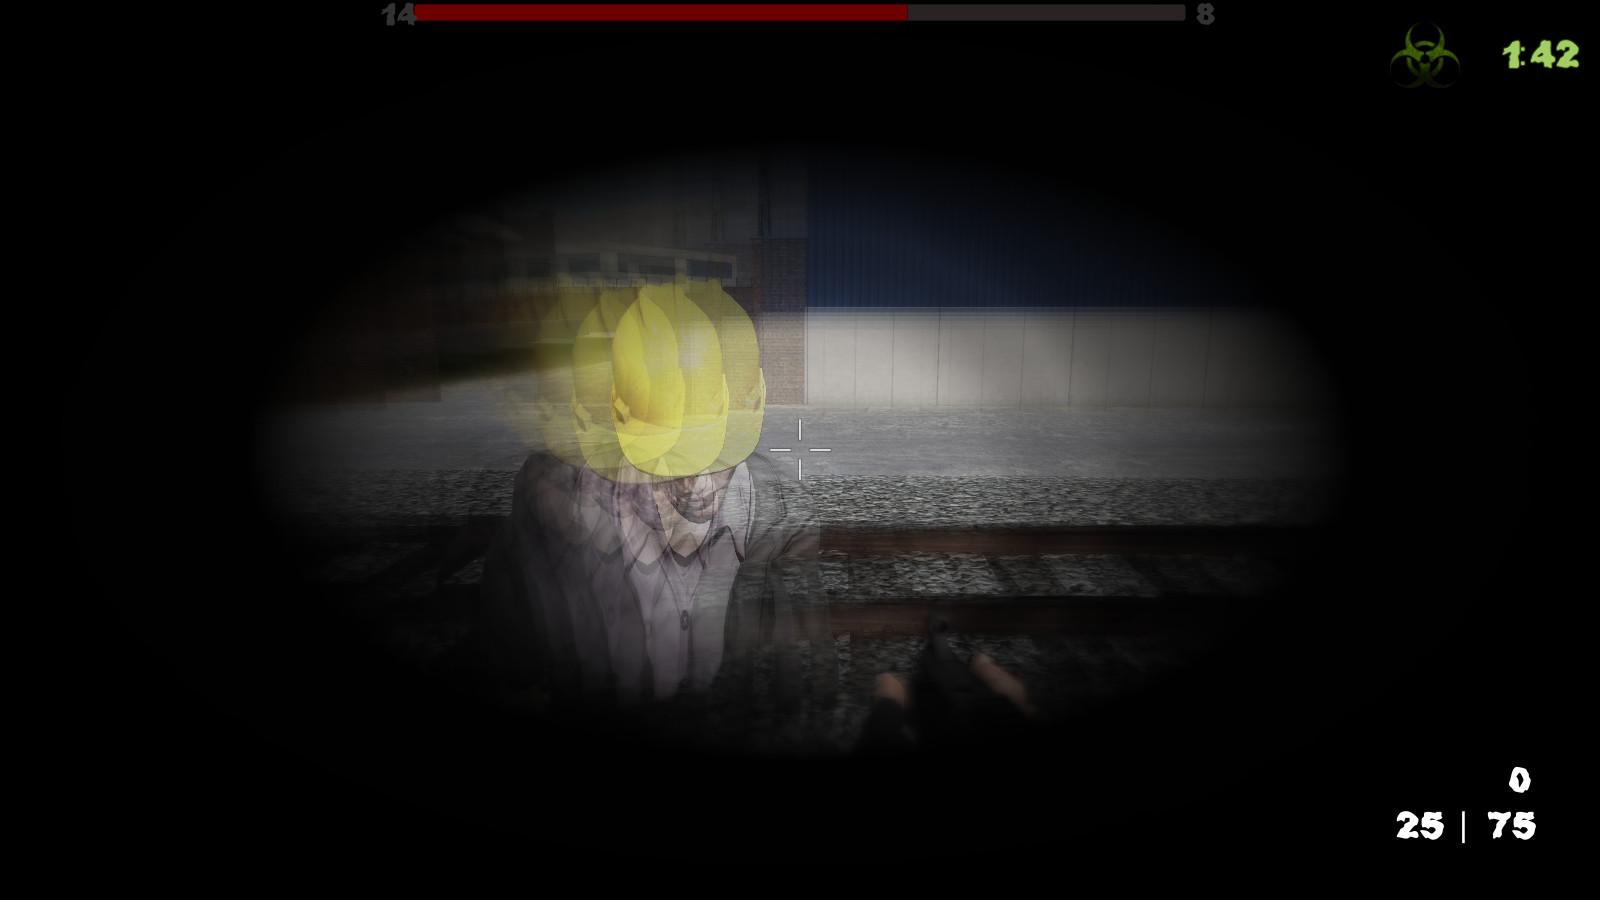 Screenshot №3 from game CONTRACTED